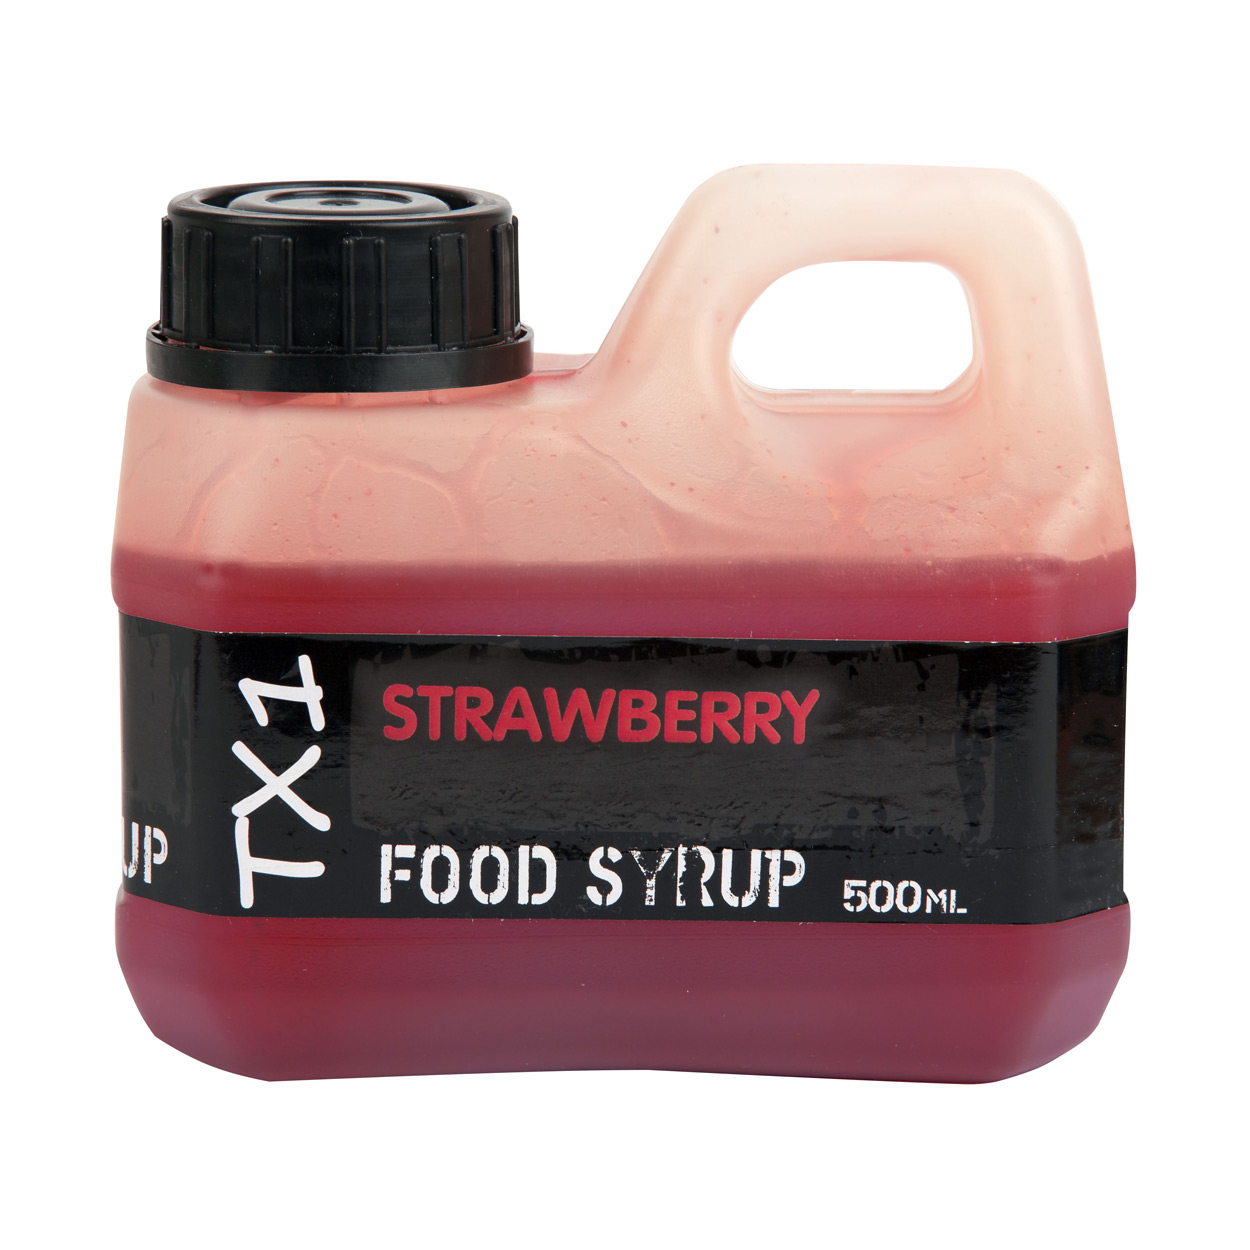 Shimano TX1 Food Syrup Attractant Strawberry (500ml)